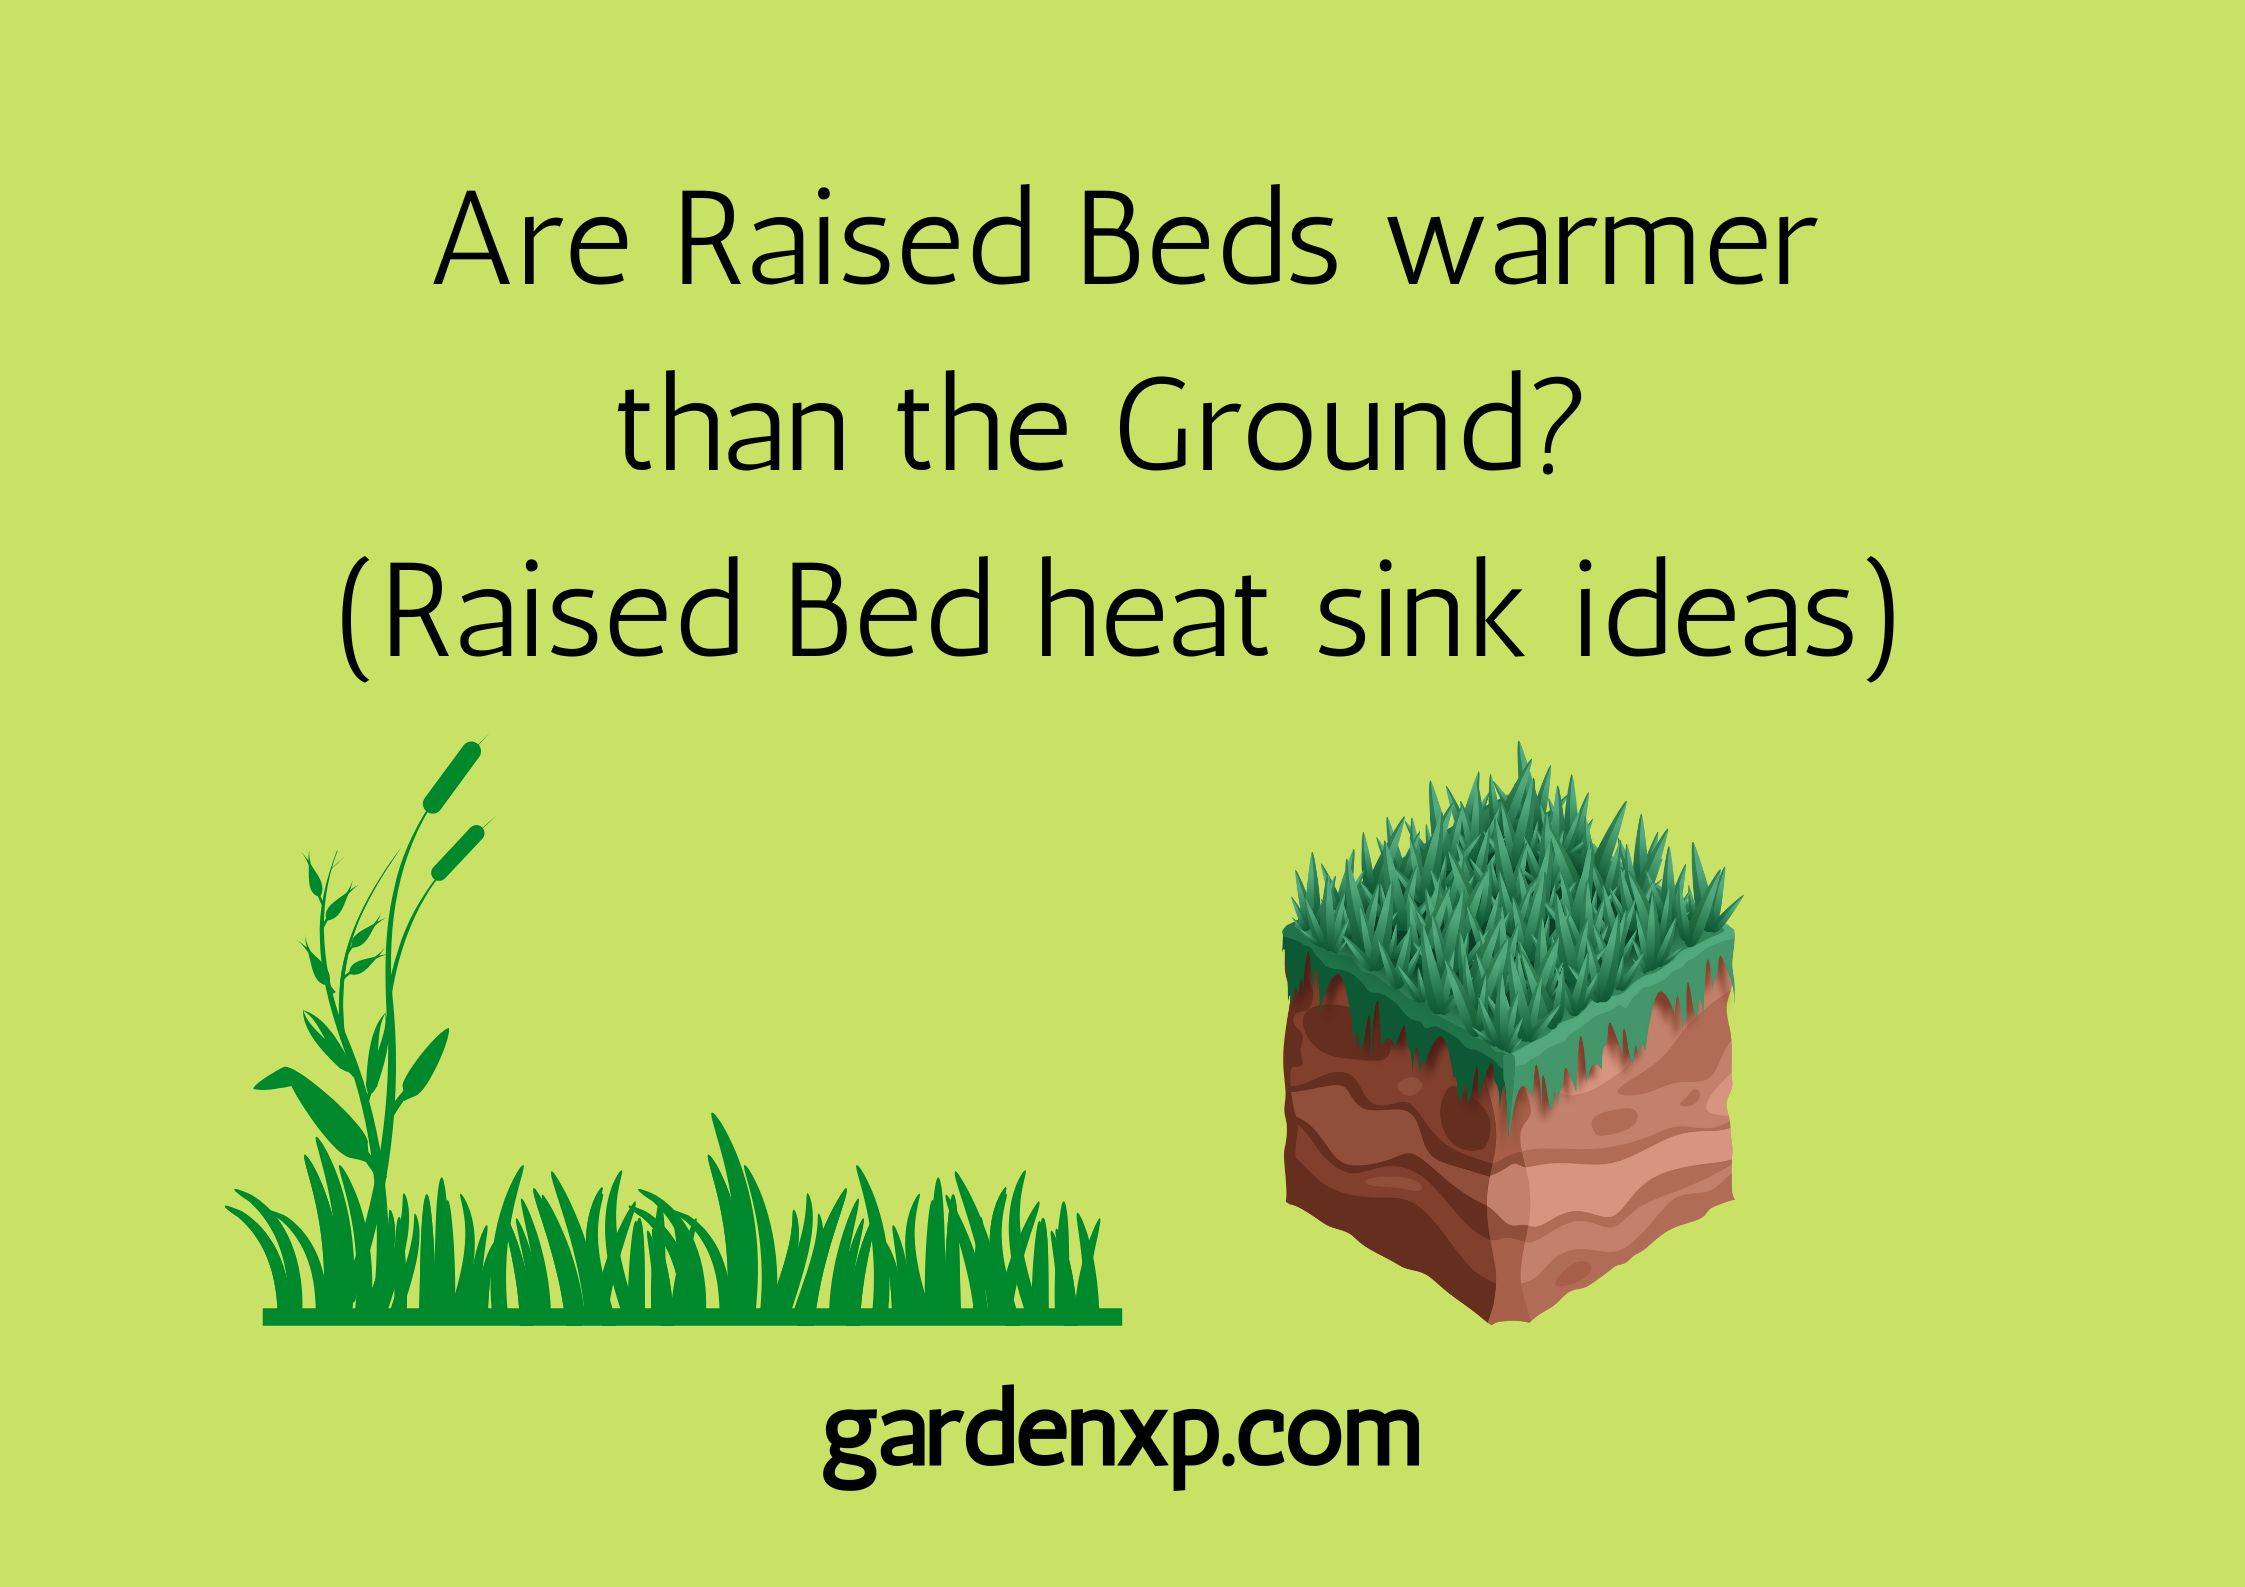 Are Raised Beds warmer than the Ground? (Raised Bed heat sink ideas)